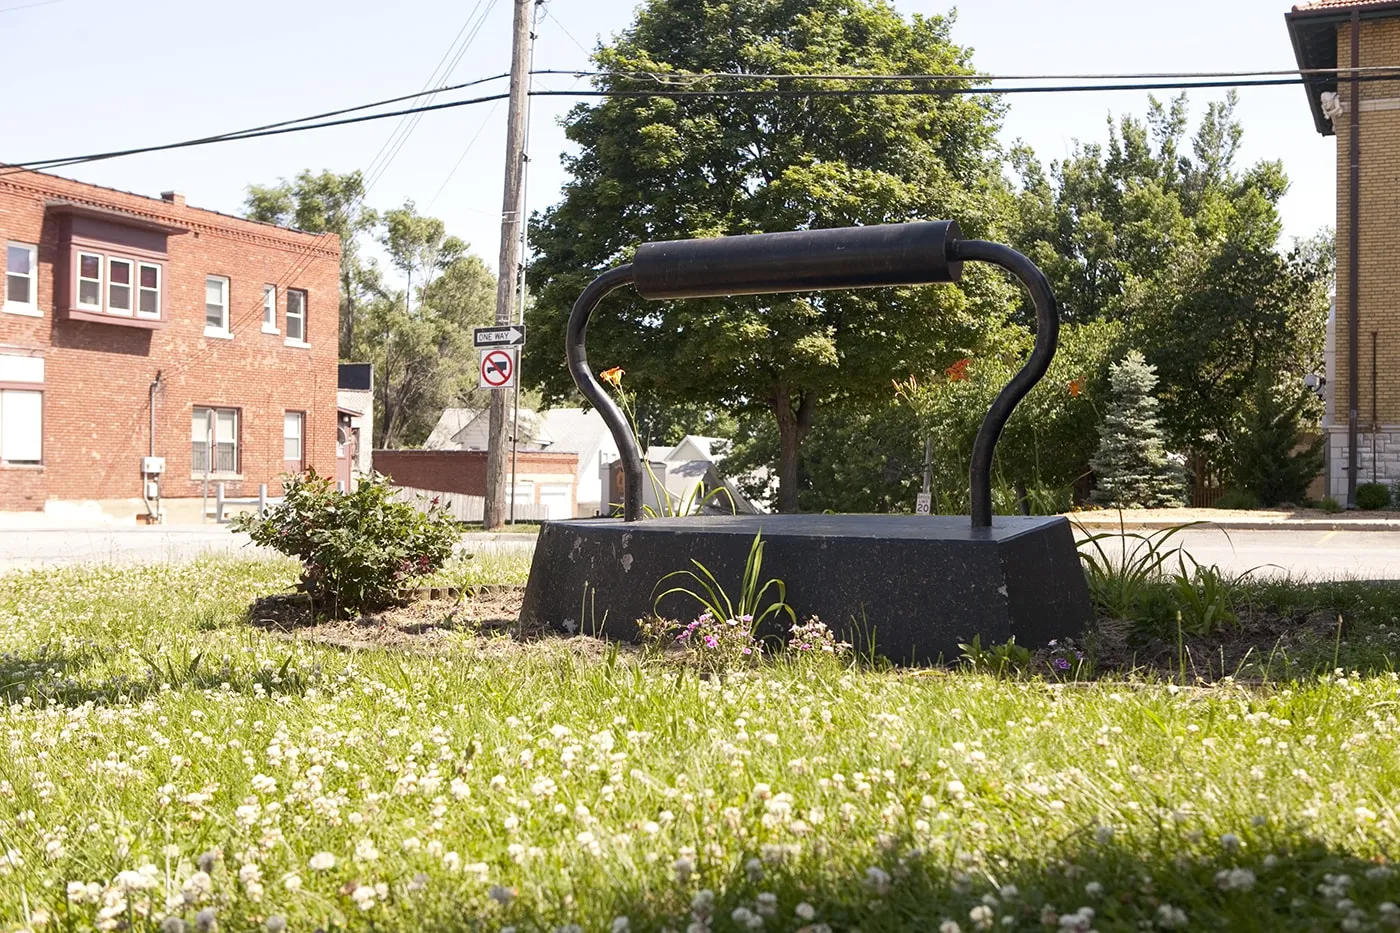 Large Old-Fashioned Iron Sculpture - a roadside attraction in Kansas City, Kansas